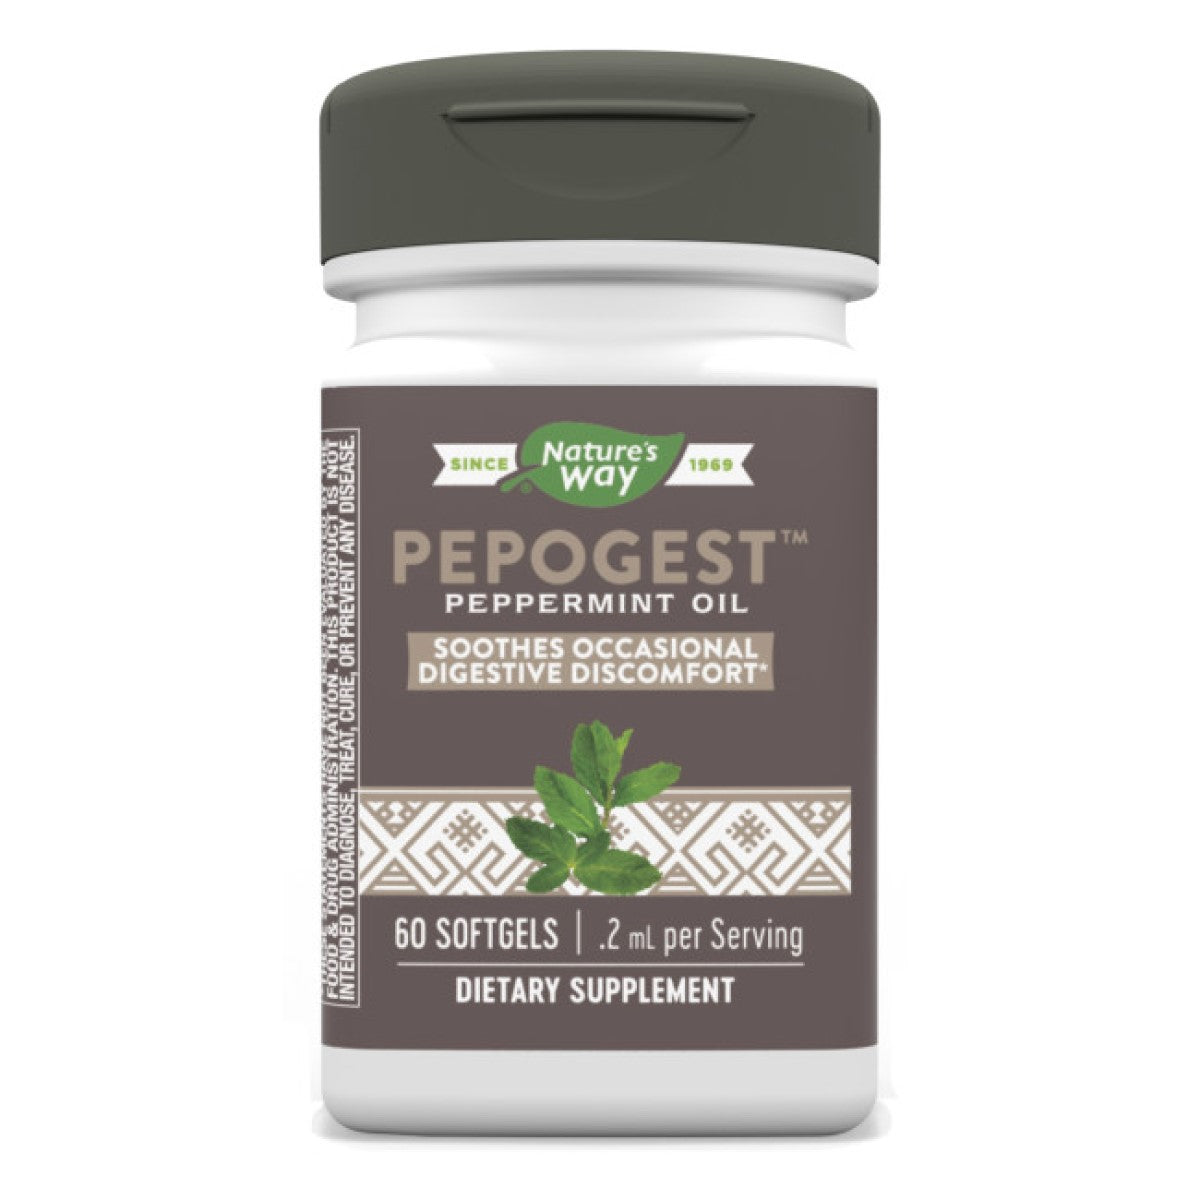 Primary image of Pepogest Peppermint Oil